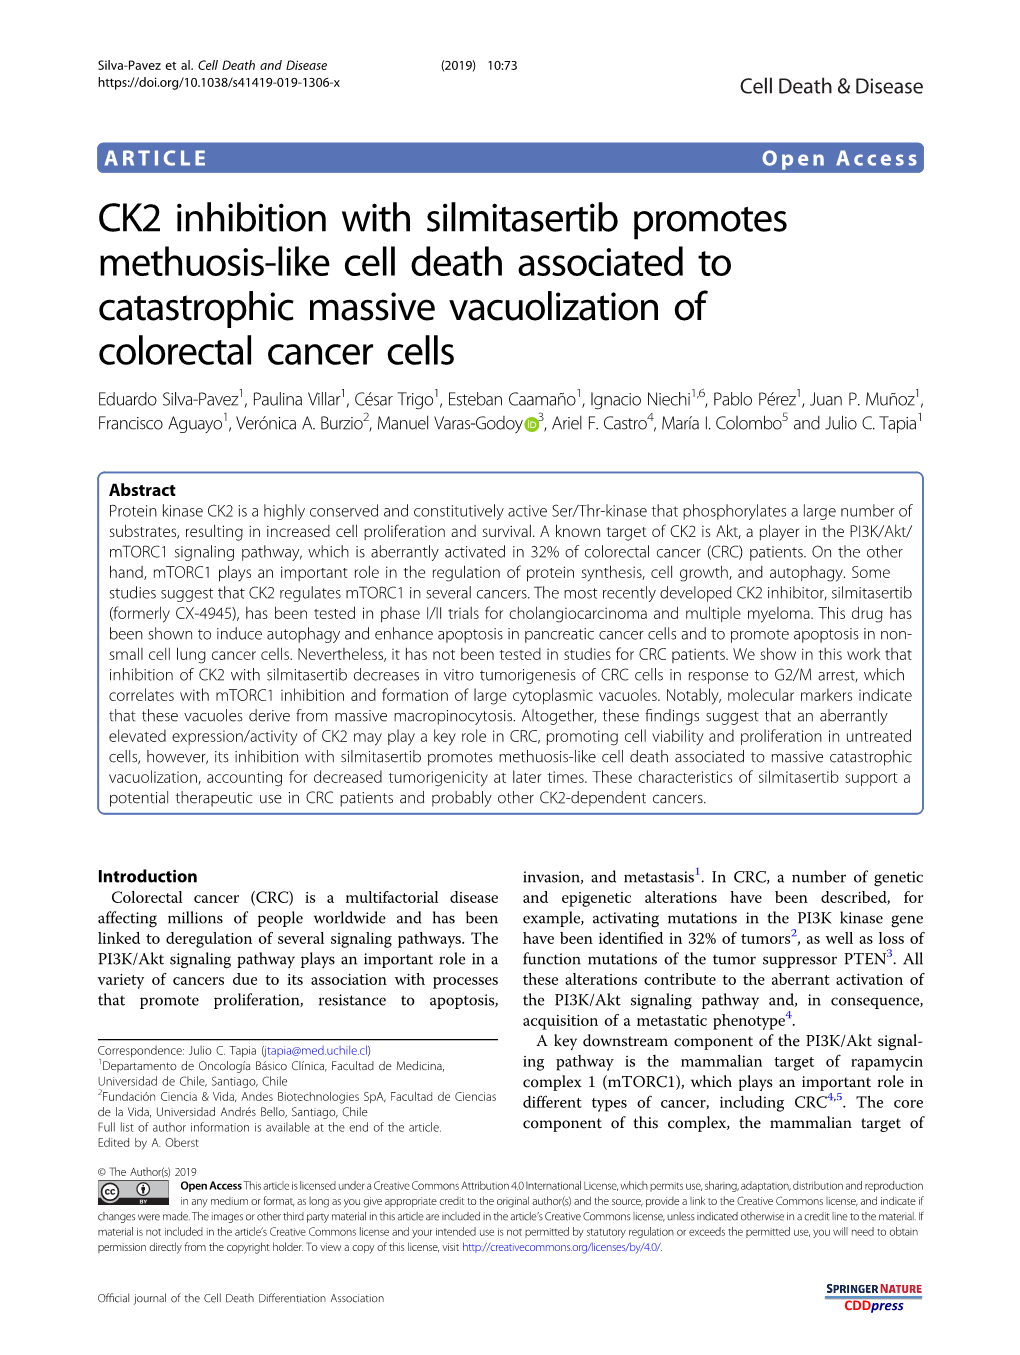 CK2 Inhibition with Silmitasertib Promotes Methuosis-Like Cell Death